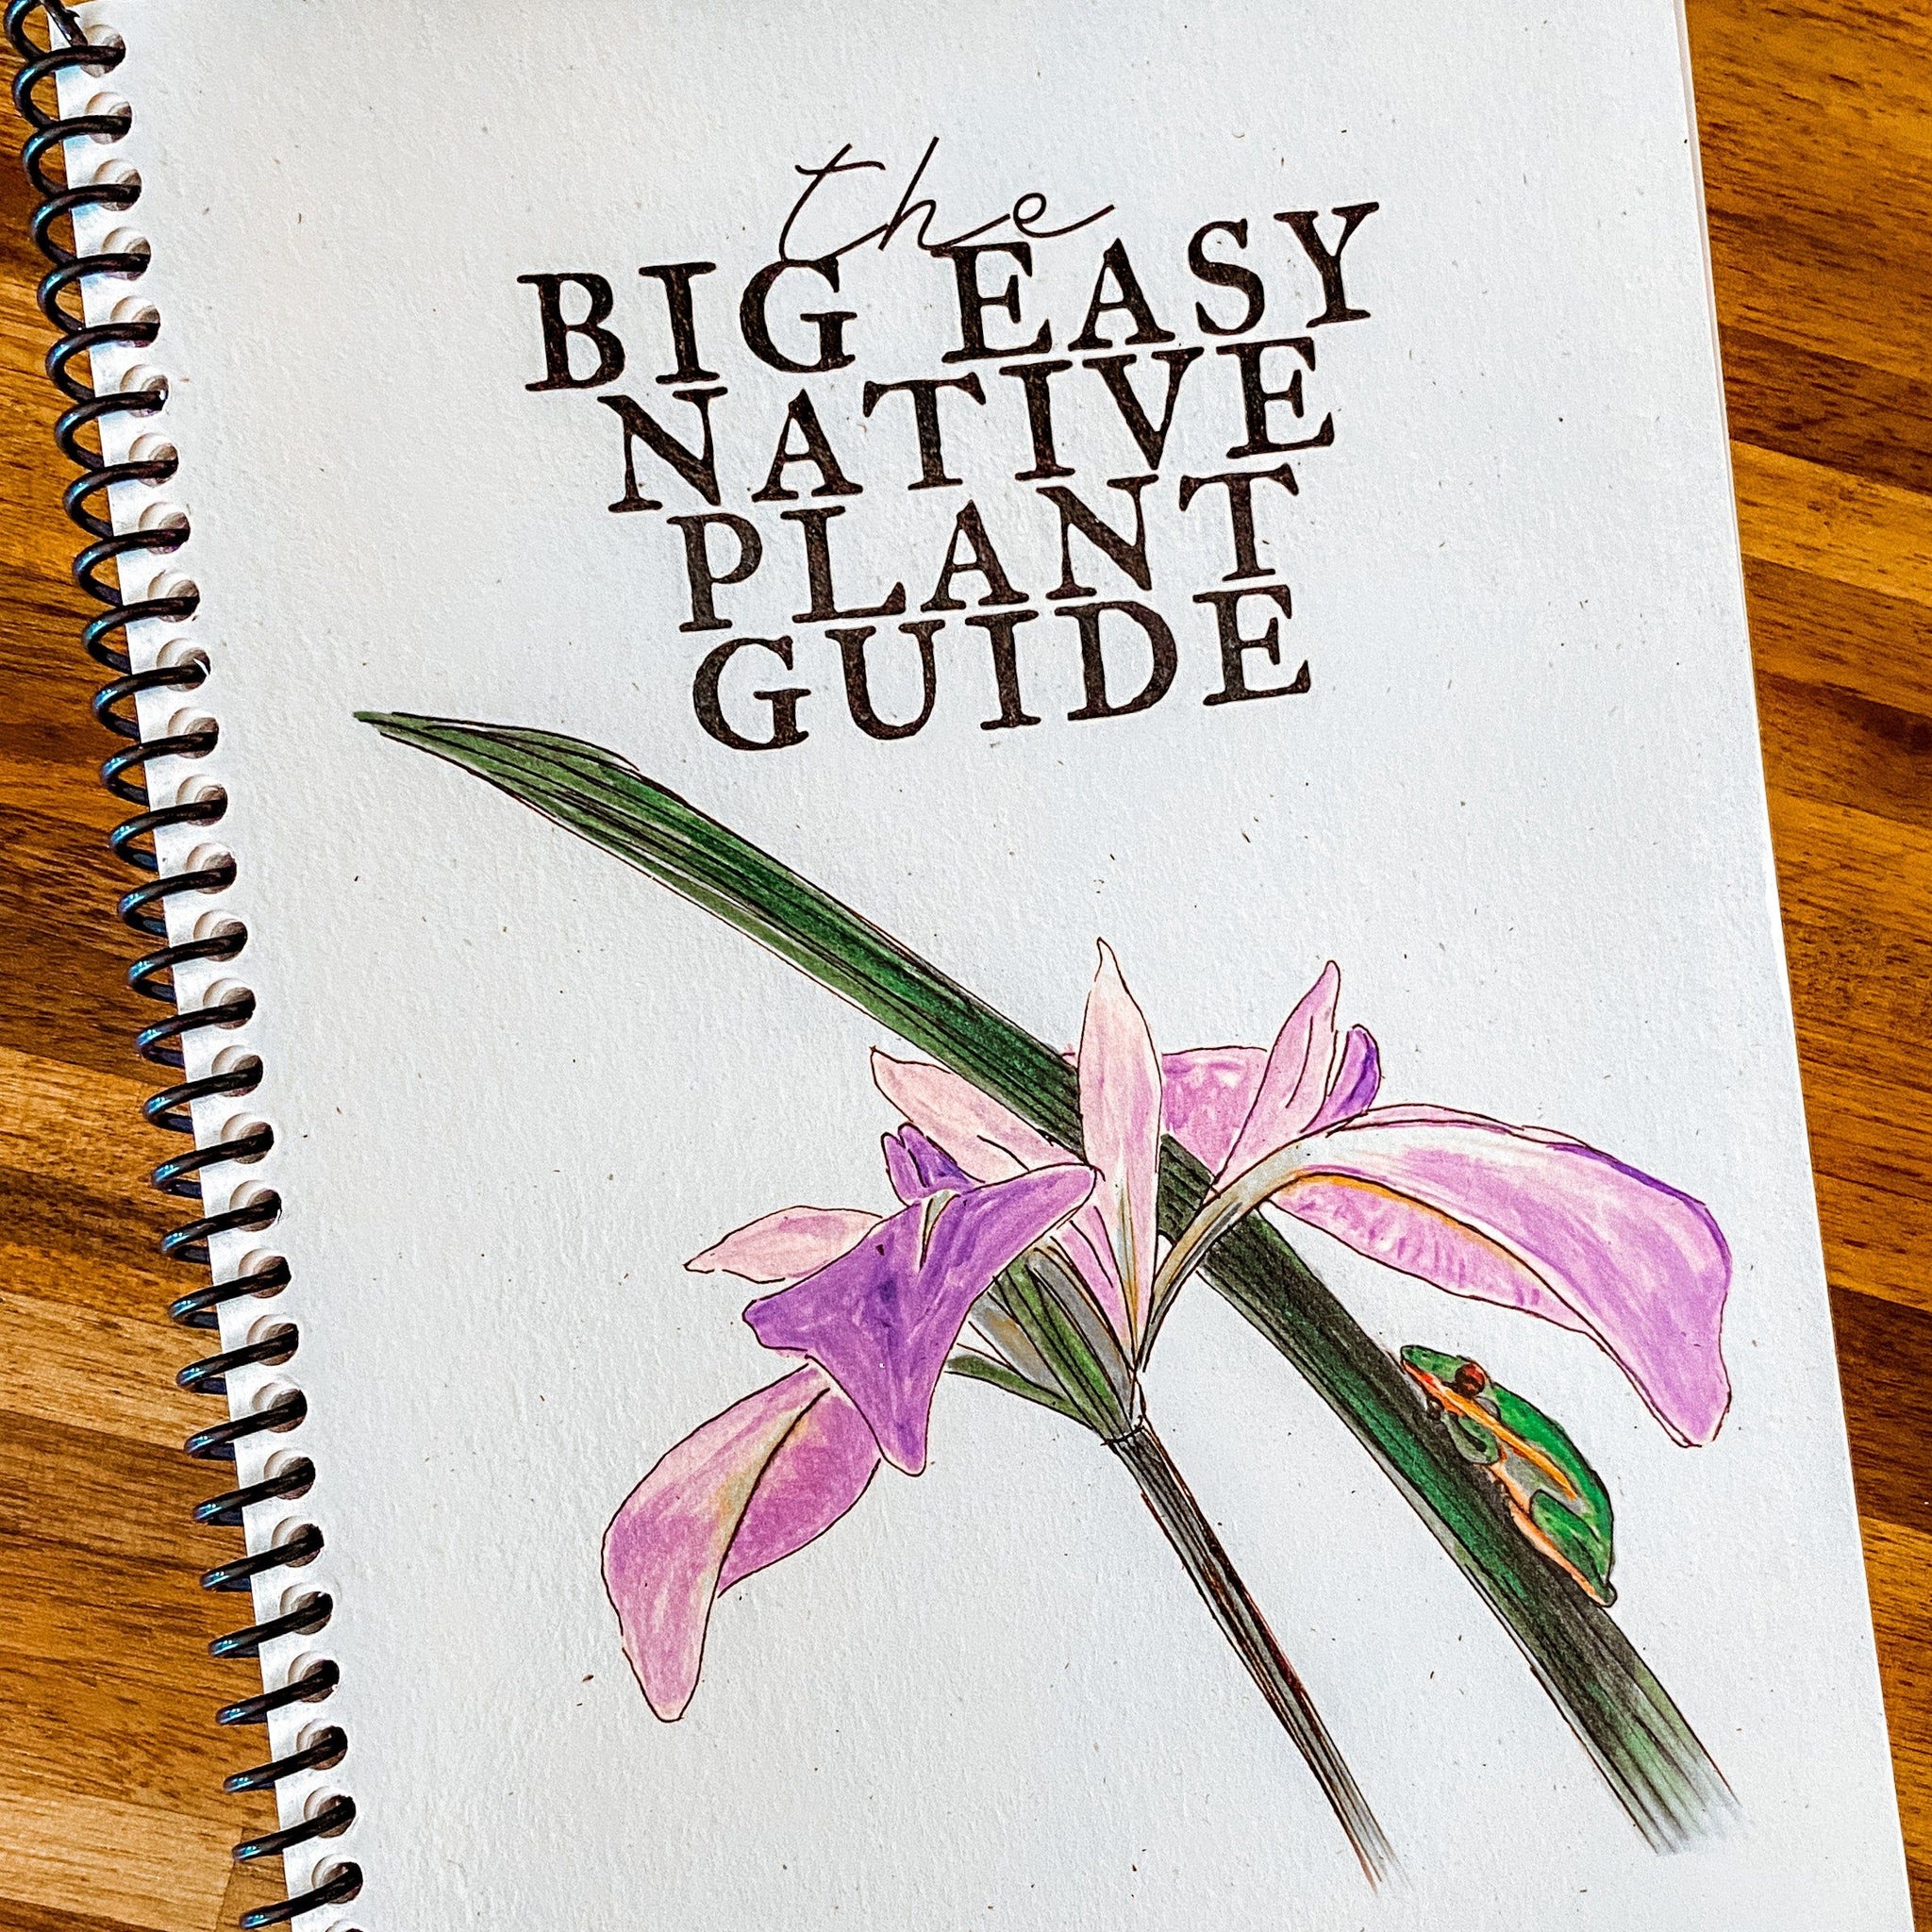 The Big Easy Native Plant Guide by Susan Norris-Davis and Amelia Wiygul